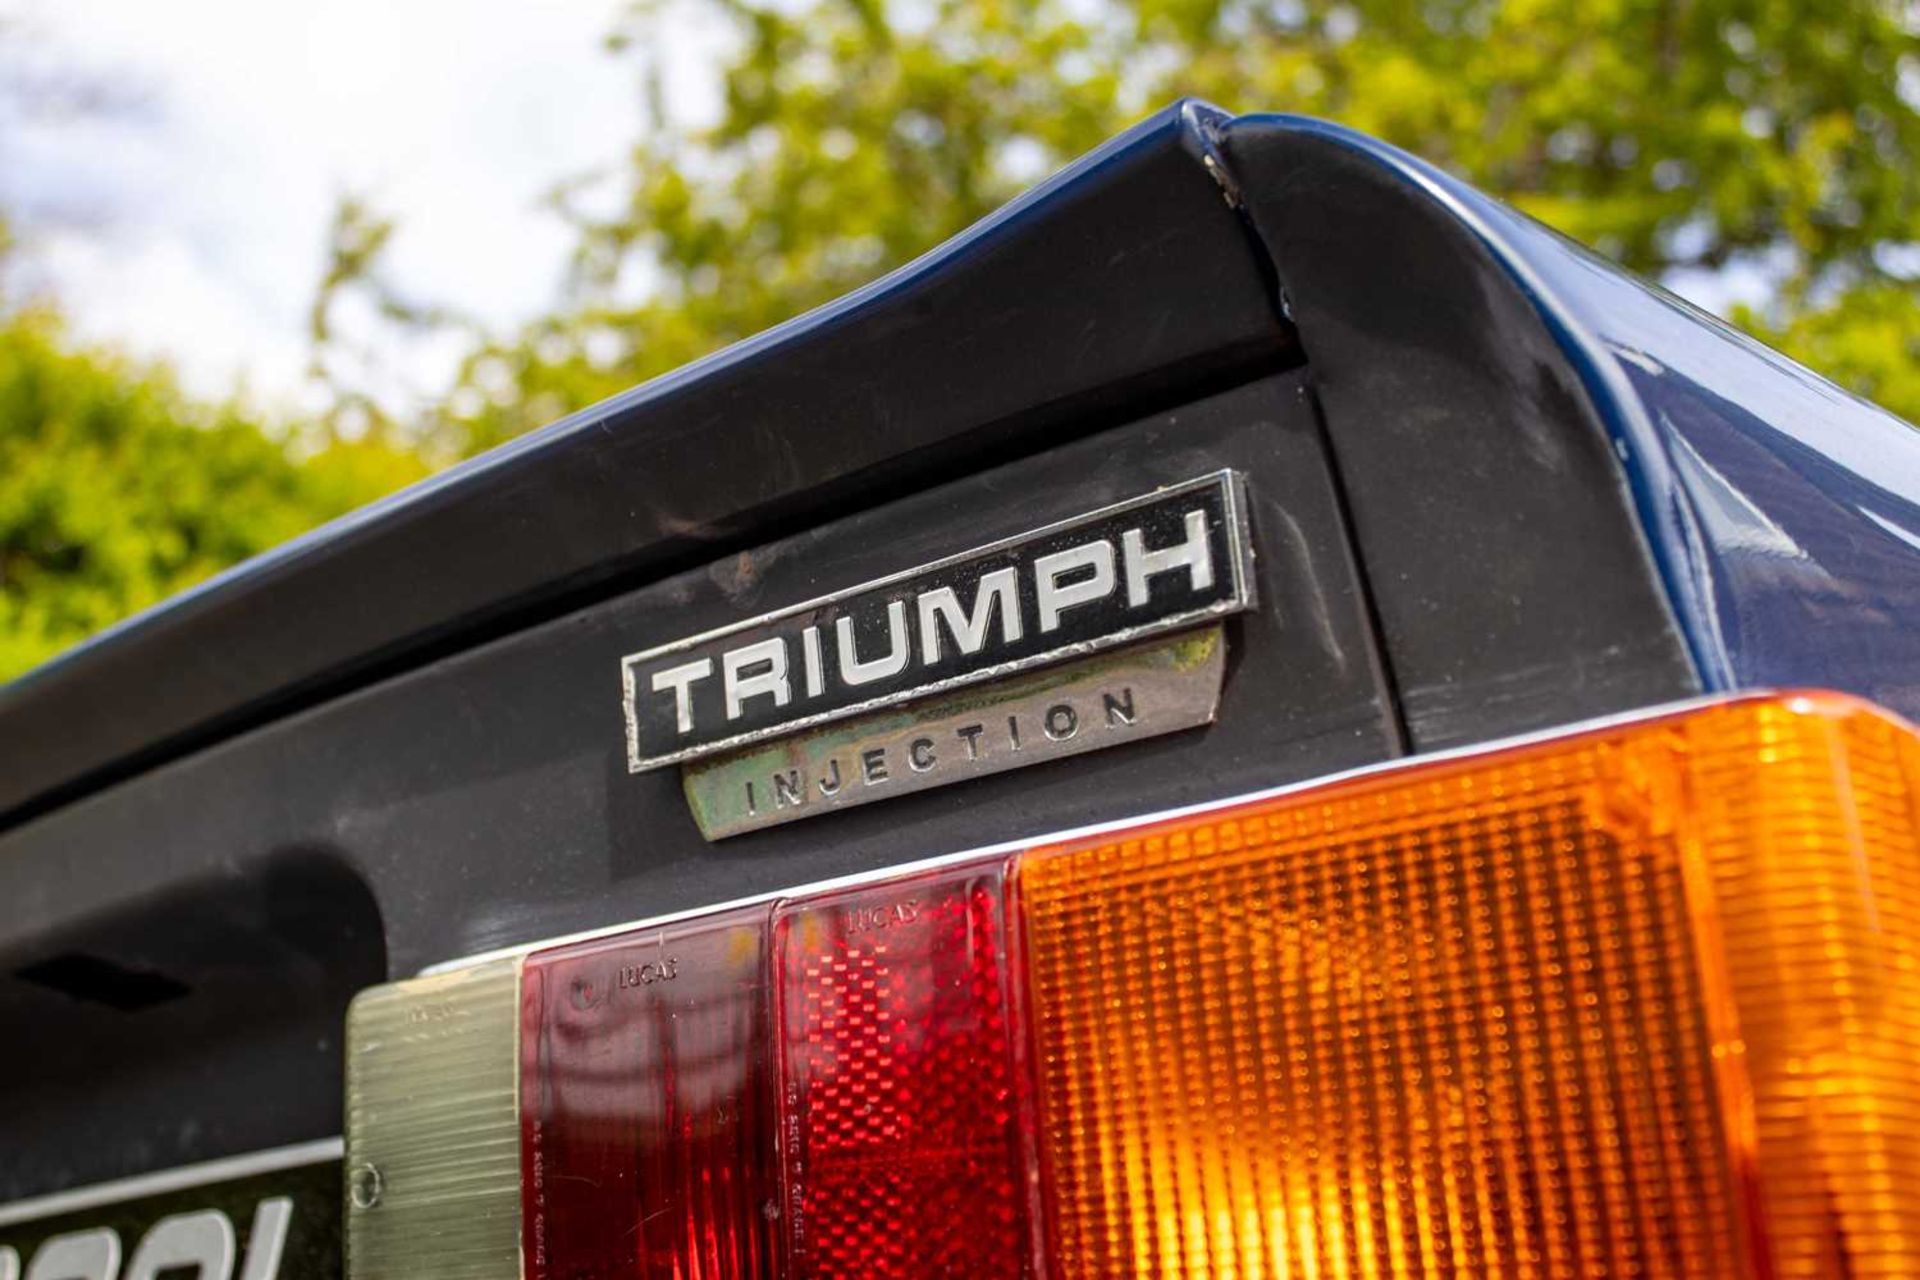 1972 Triumph TR6 Home market example, specified with manual overdrive transmission - Image 19 of 95